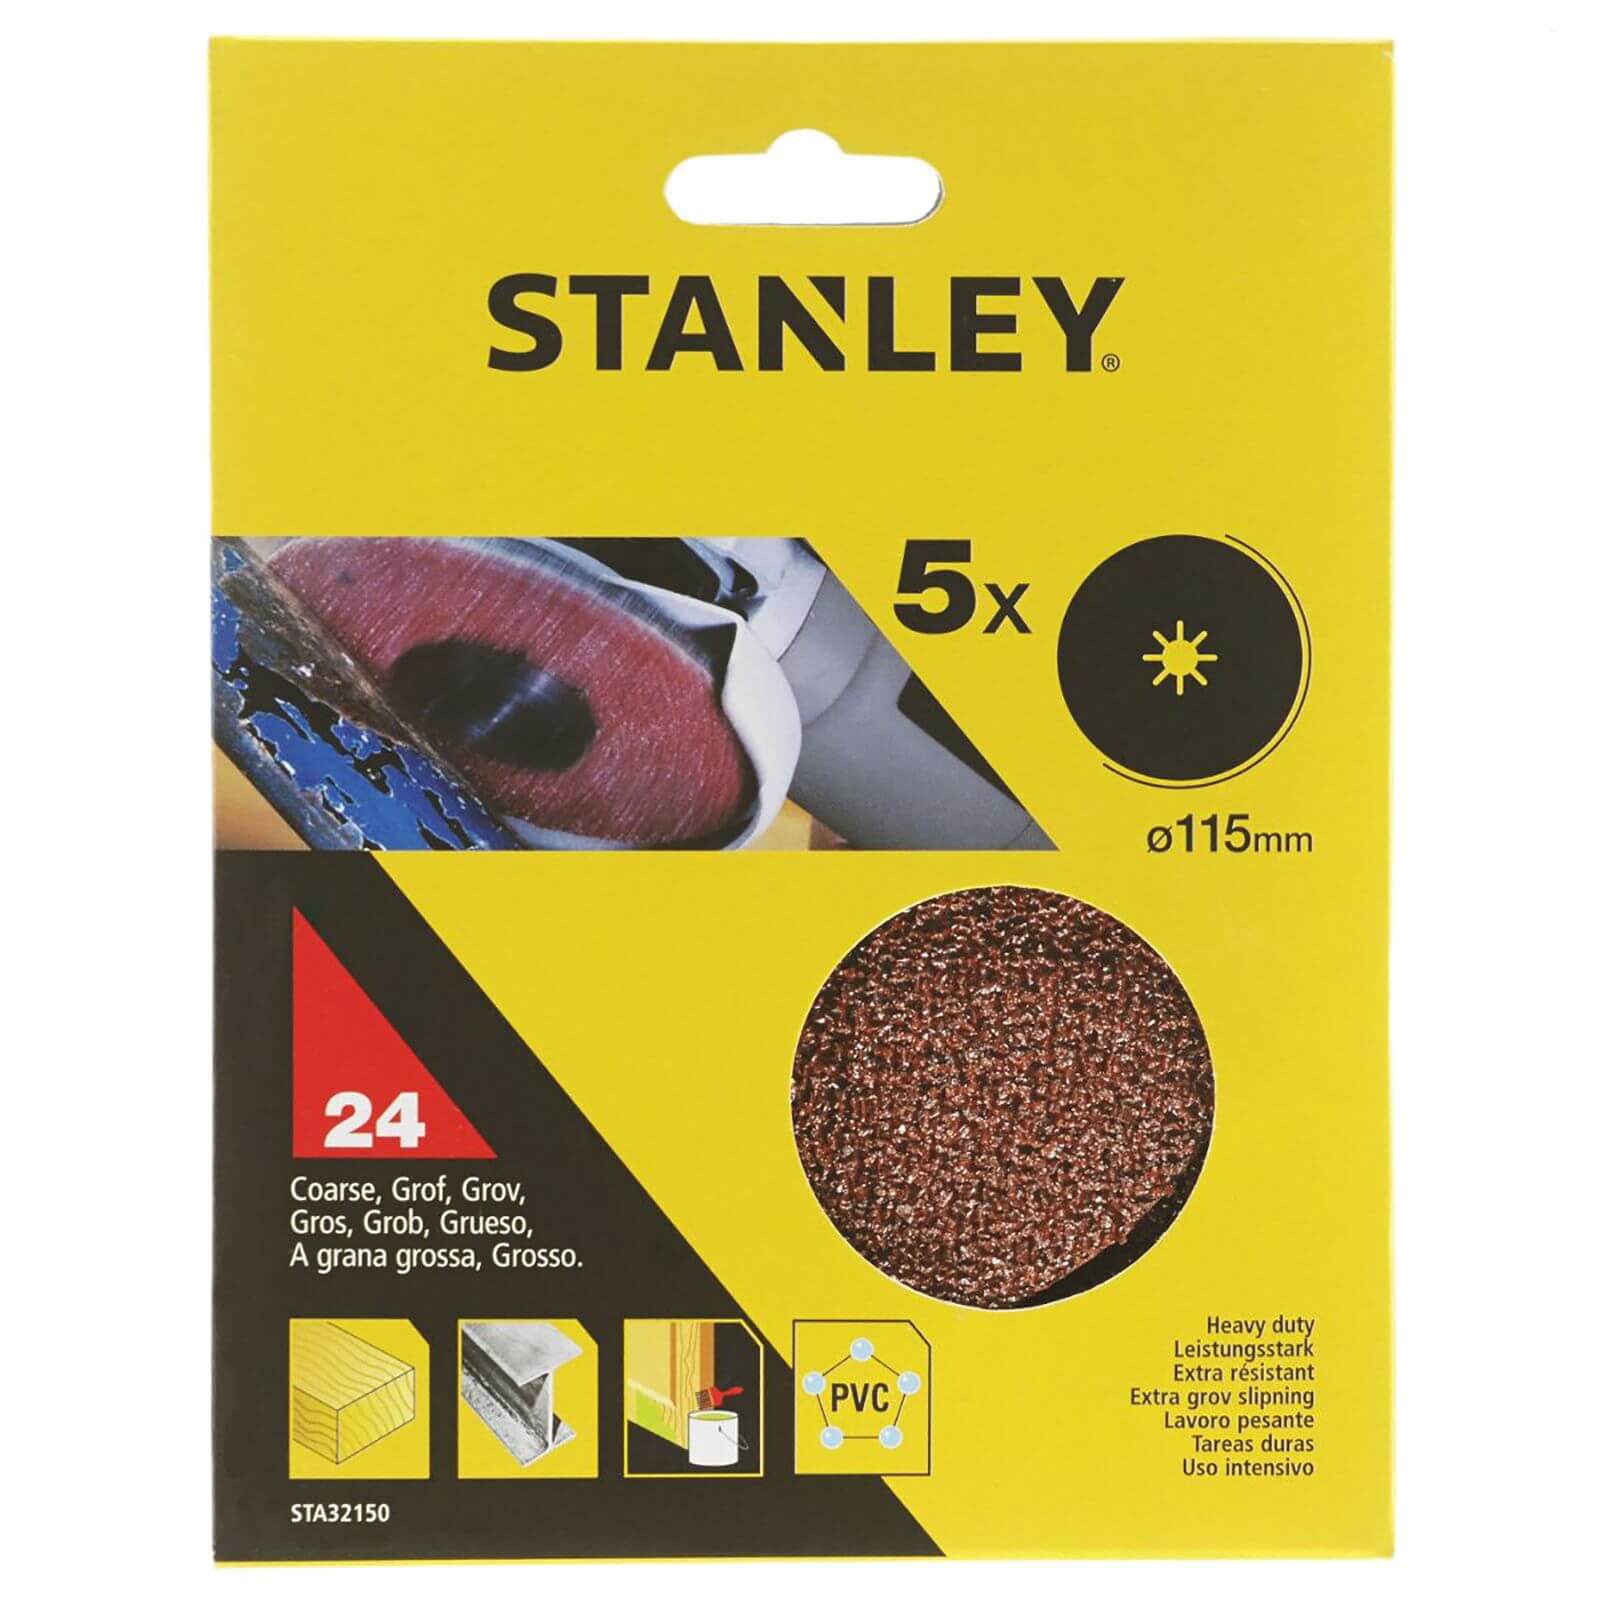 Photo of Stanley 115mm Grinding Pads 24g - Sta32150-xj